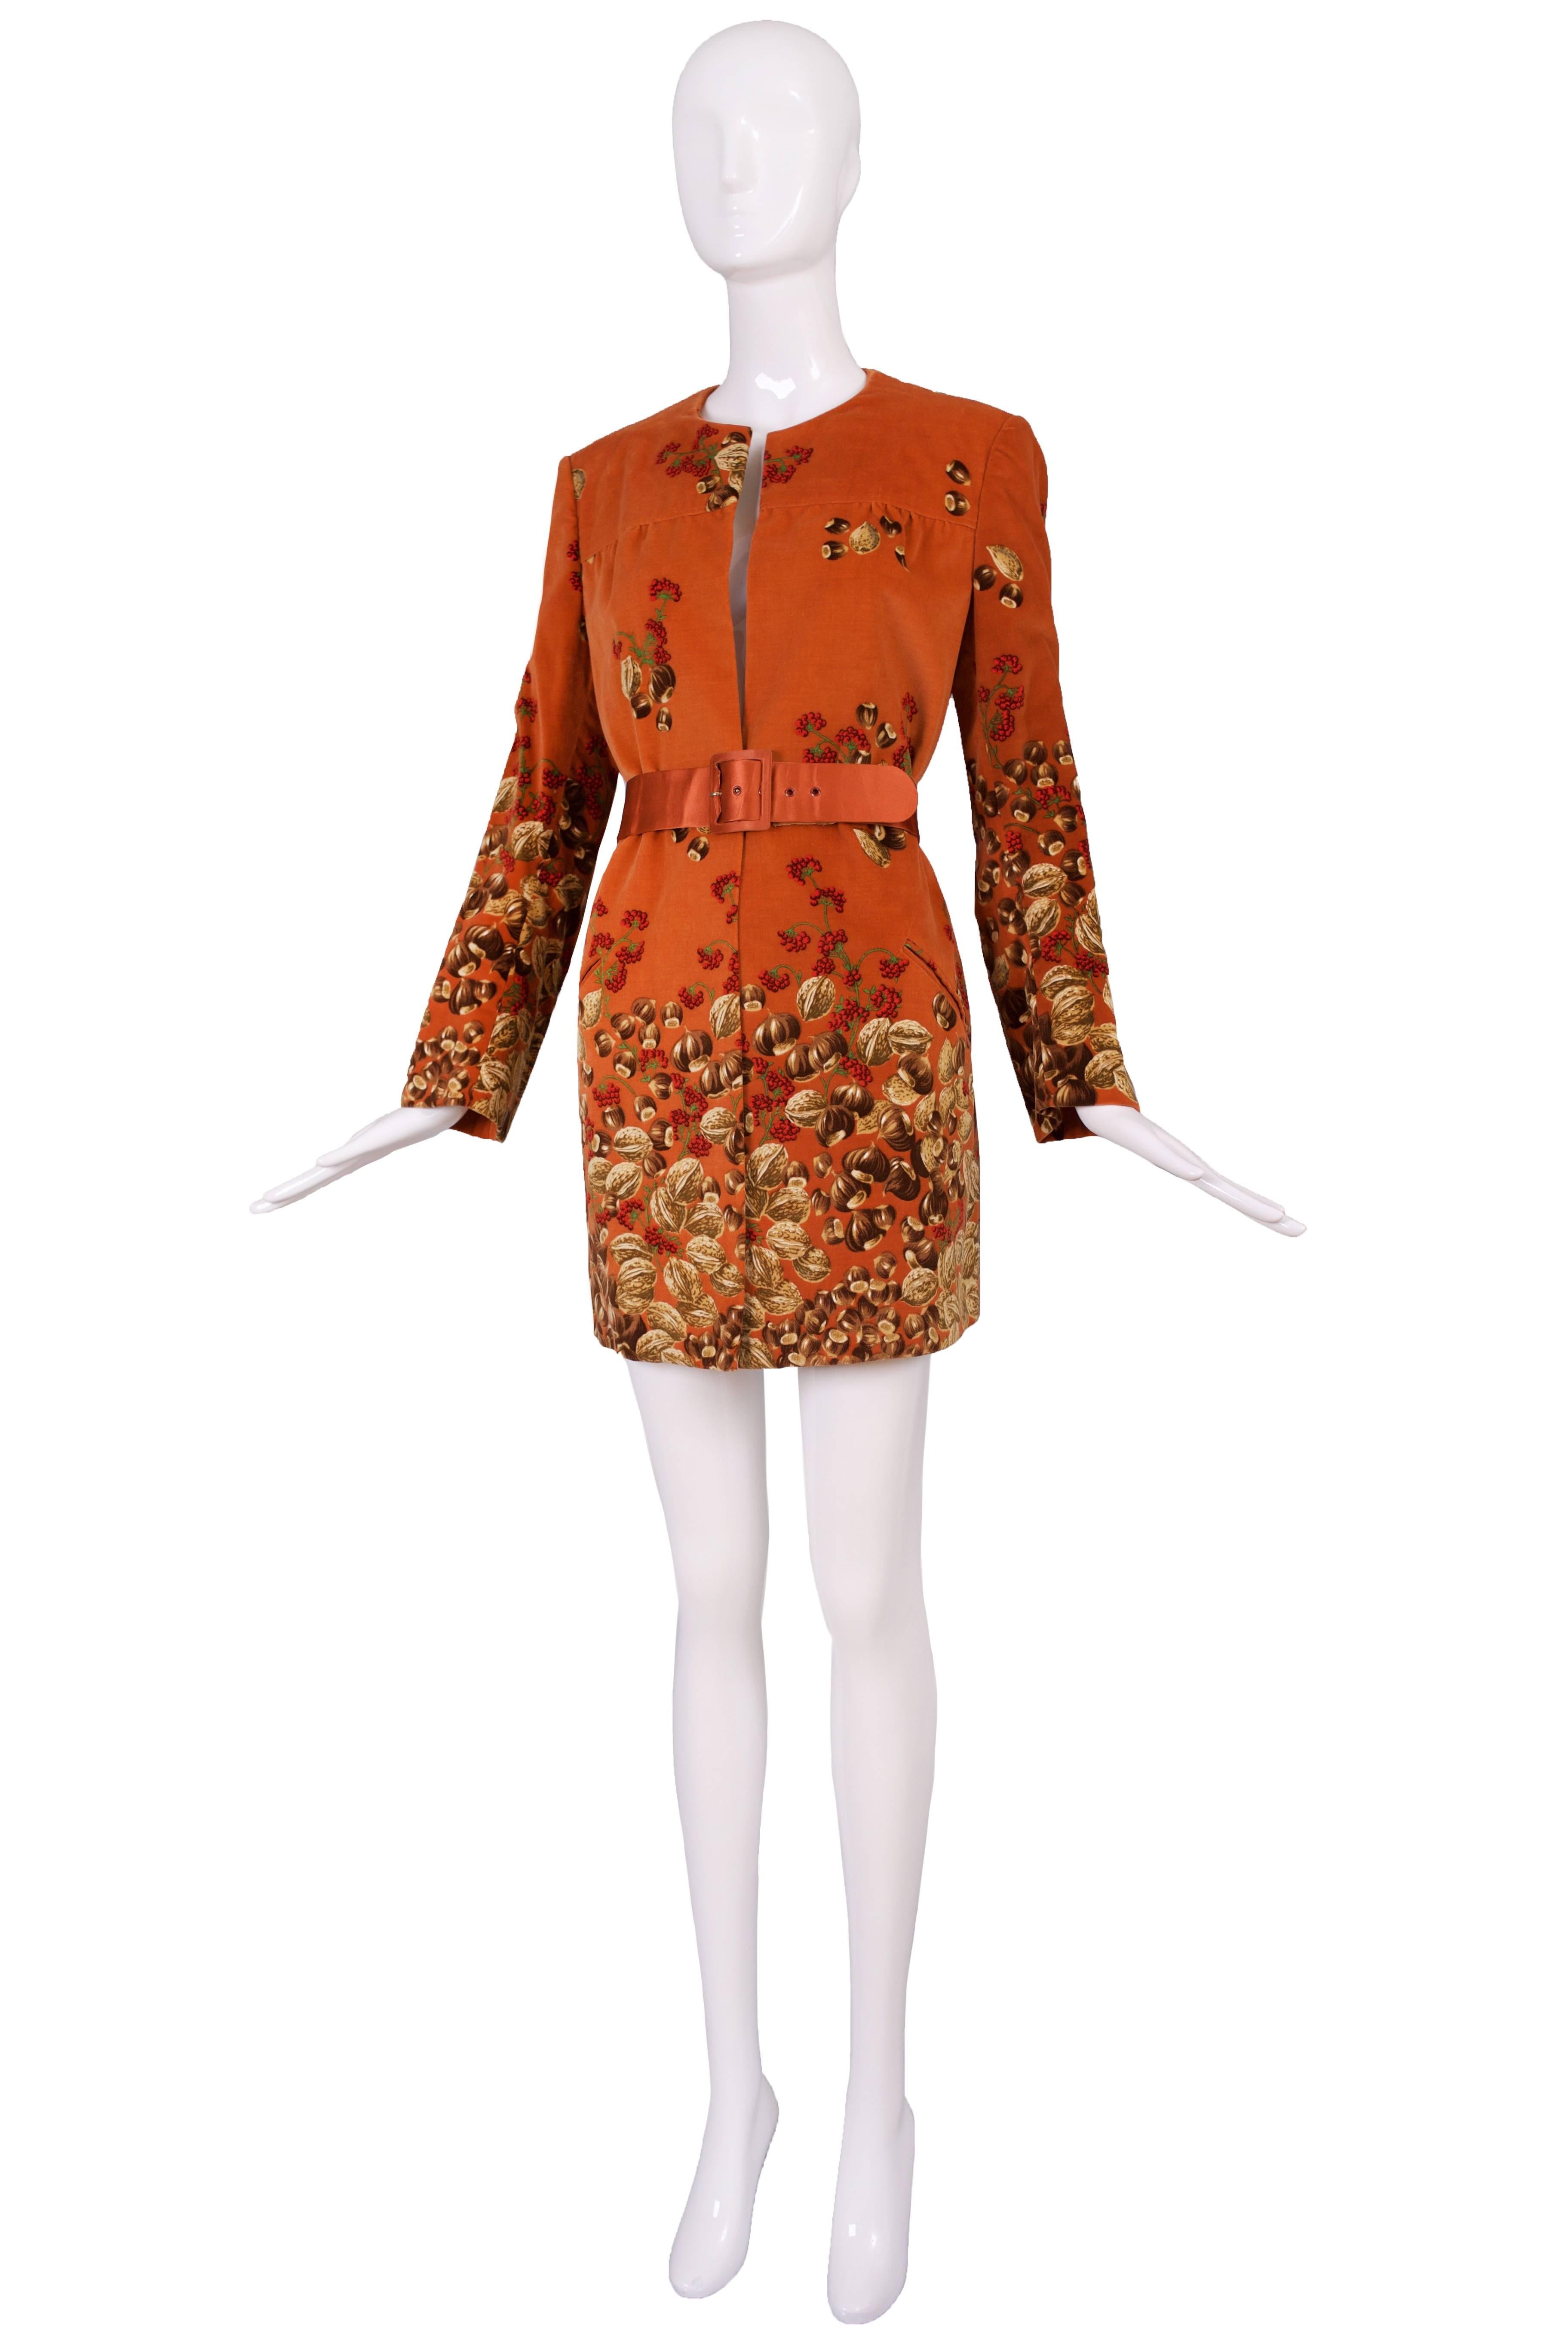 1970's Valentino burnt orange chestnut and walnut print velvet jacket with matching satin belt and frontal pockets. Jacket is in excellent condition but belt is in fair to good condition - could stand to be repaired. Italian size tag 12 but will